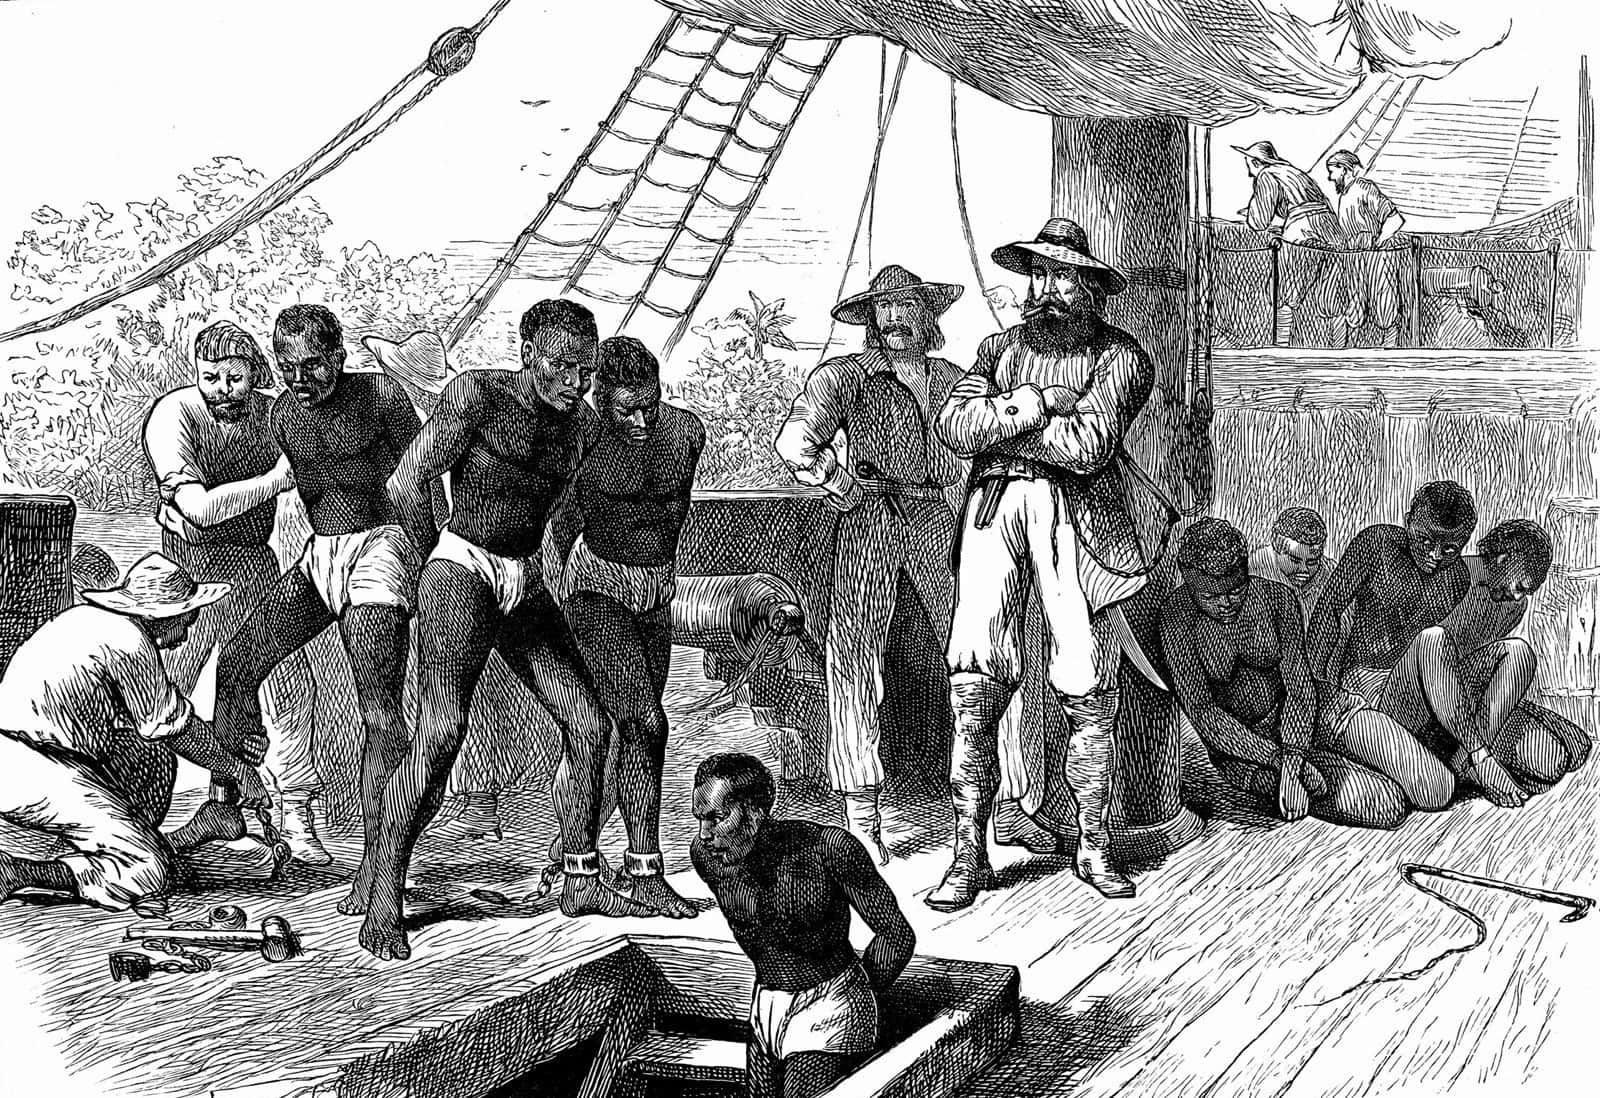 Depiction of History: An Enslaved Individual